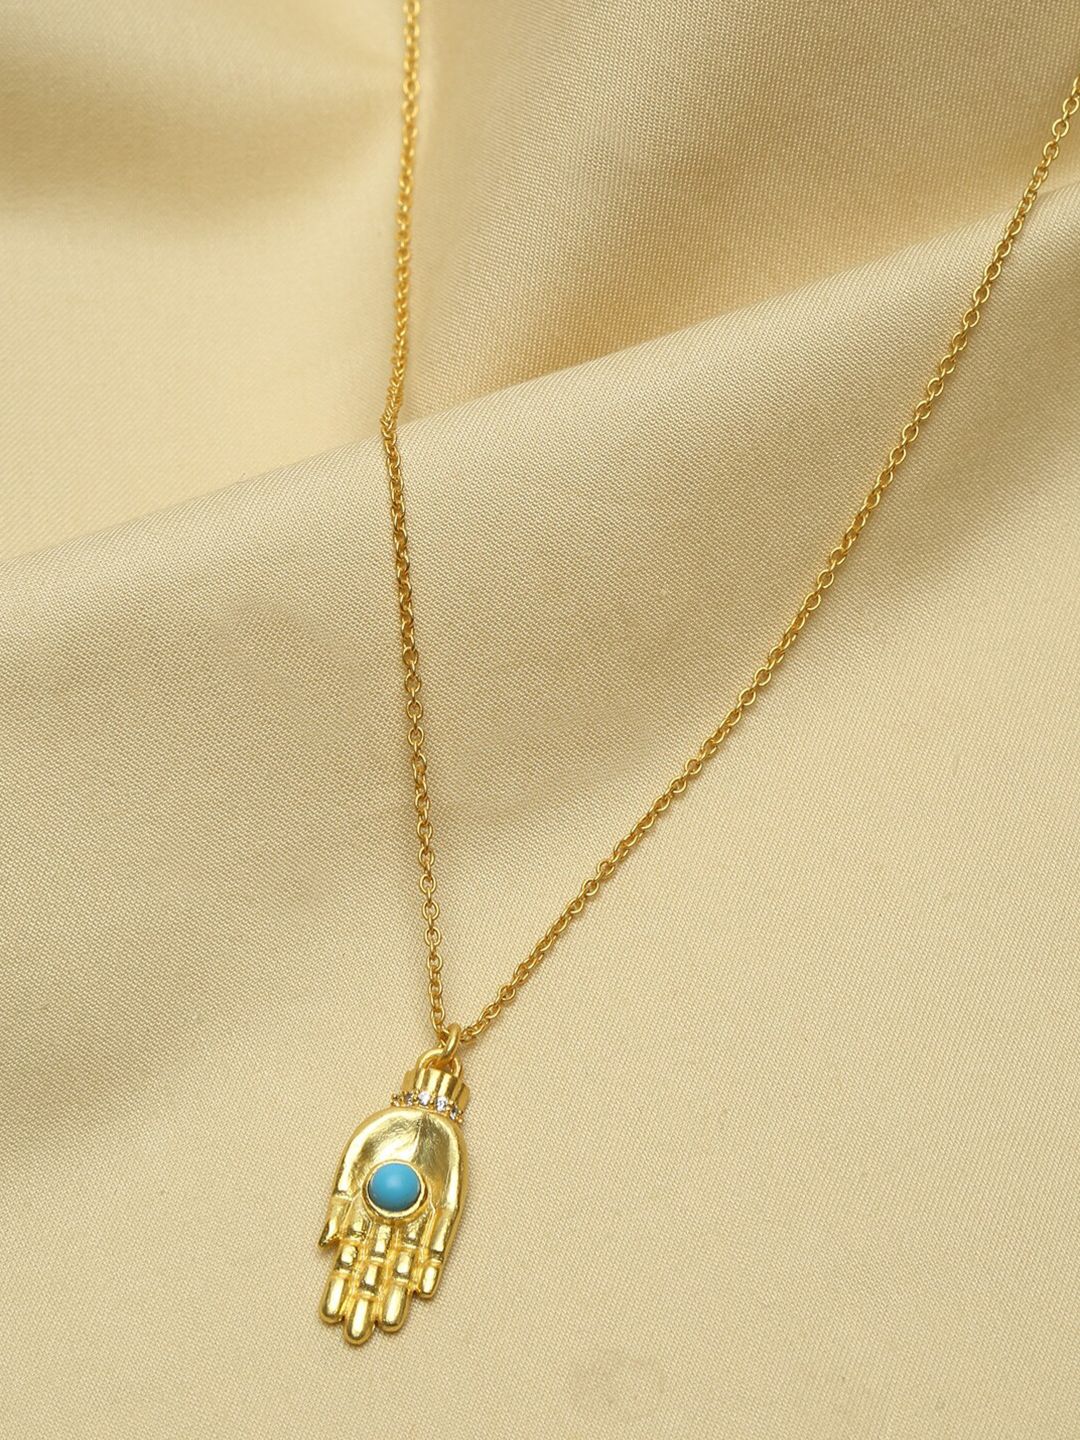 EK BY EKTA KAPOOR Gold-Toned & Turquoise Blue Gold-Plated Necklace Price in India